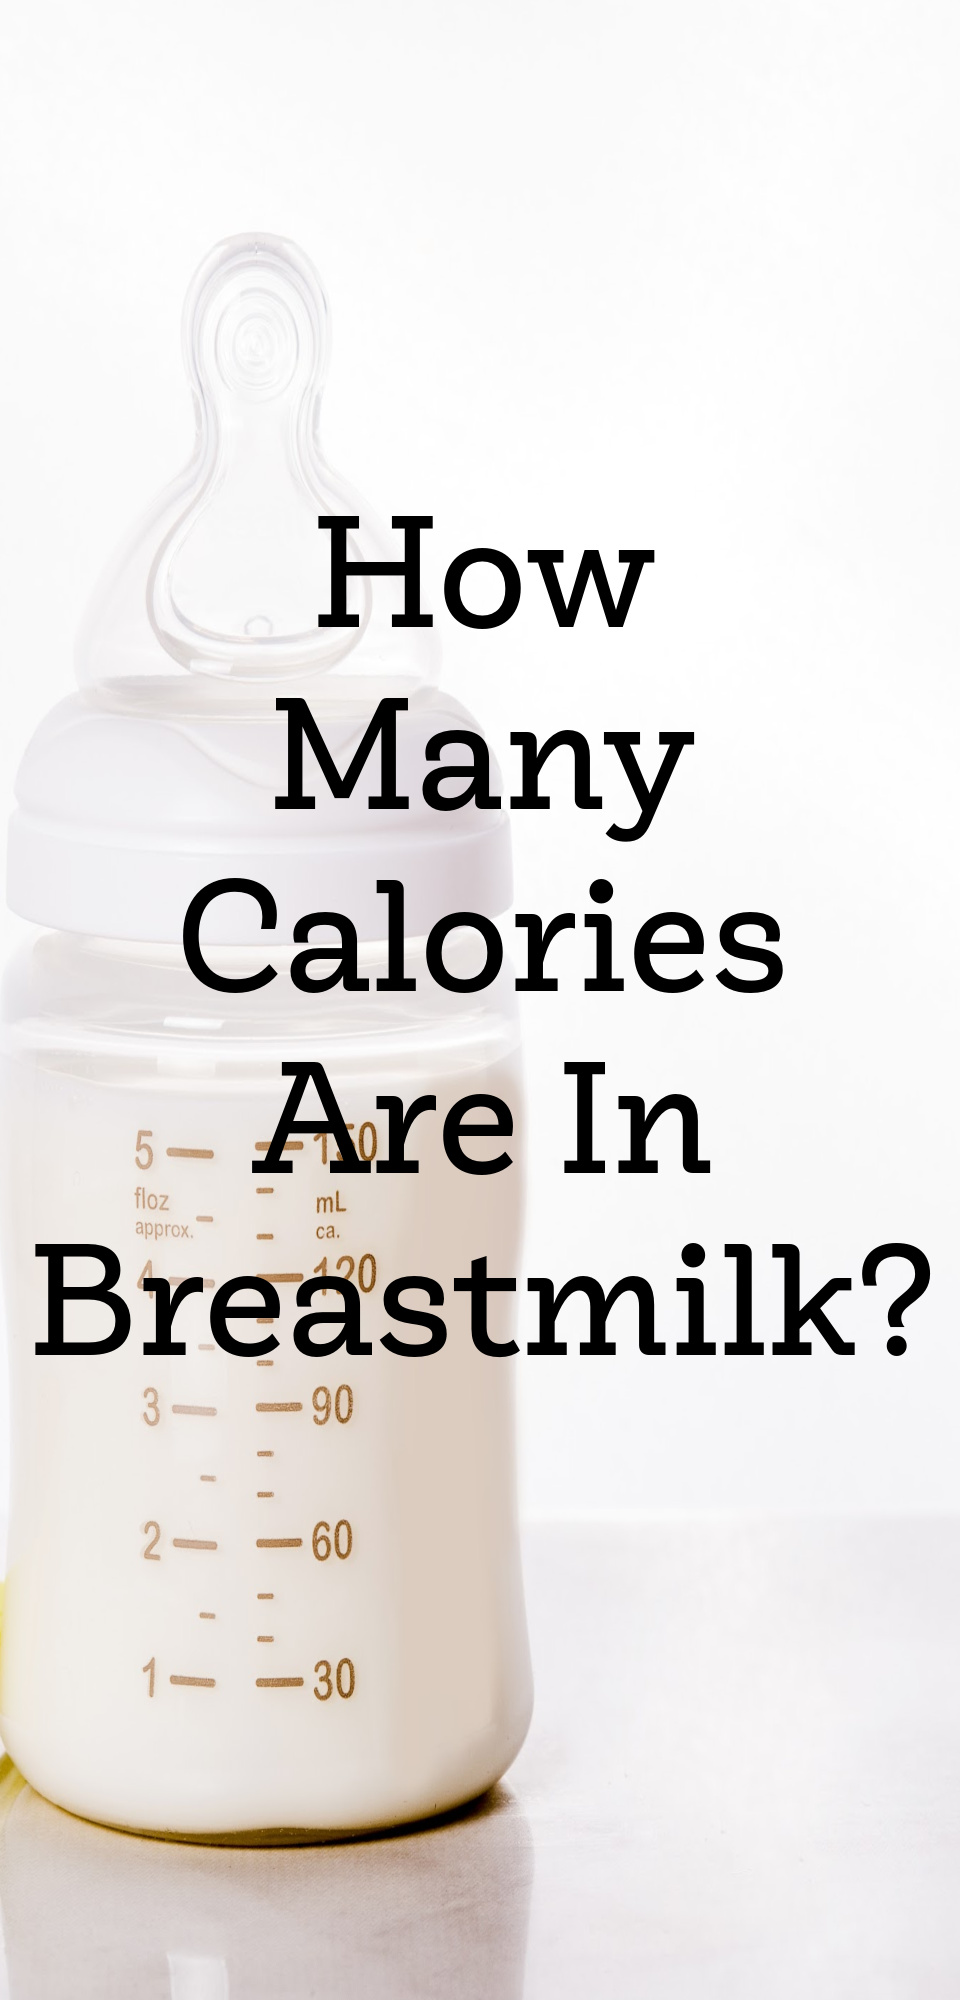 How Many Calories Are In Breastmilk?